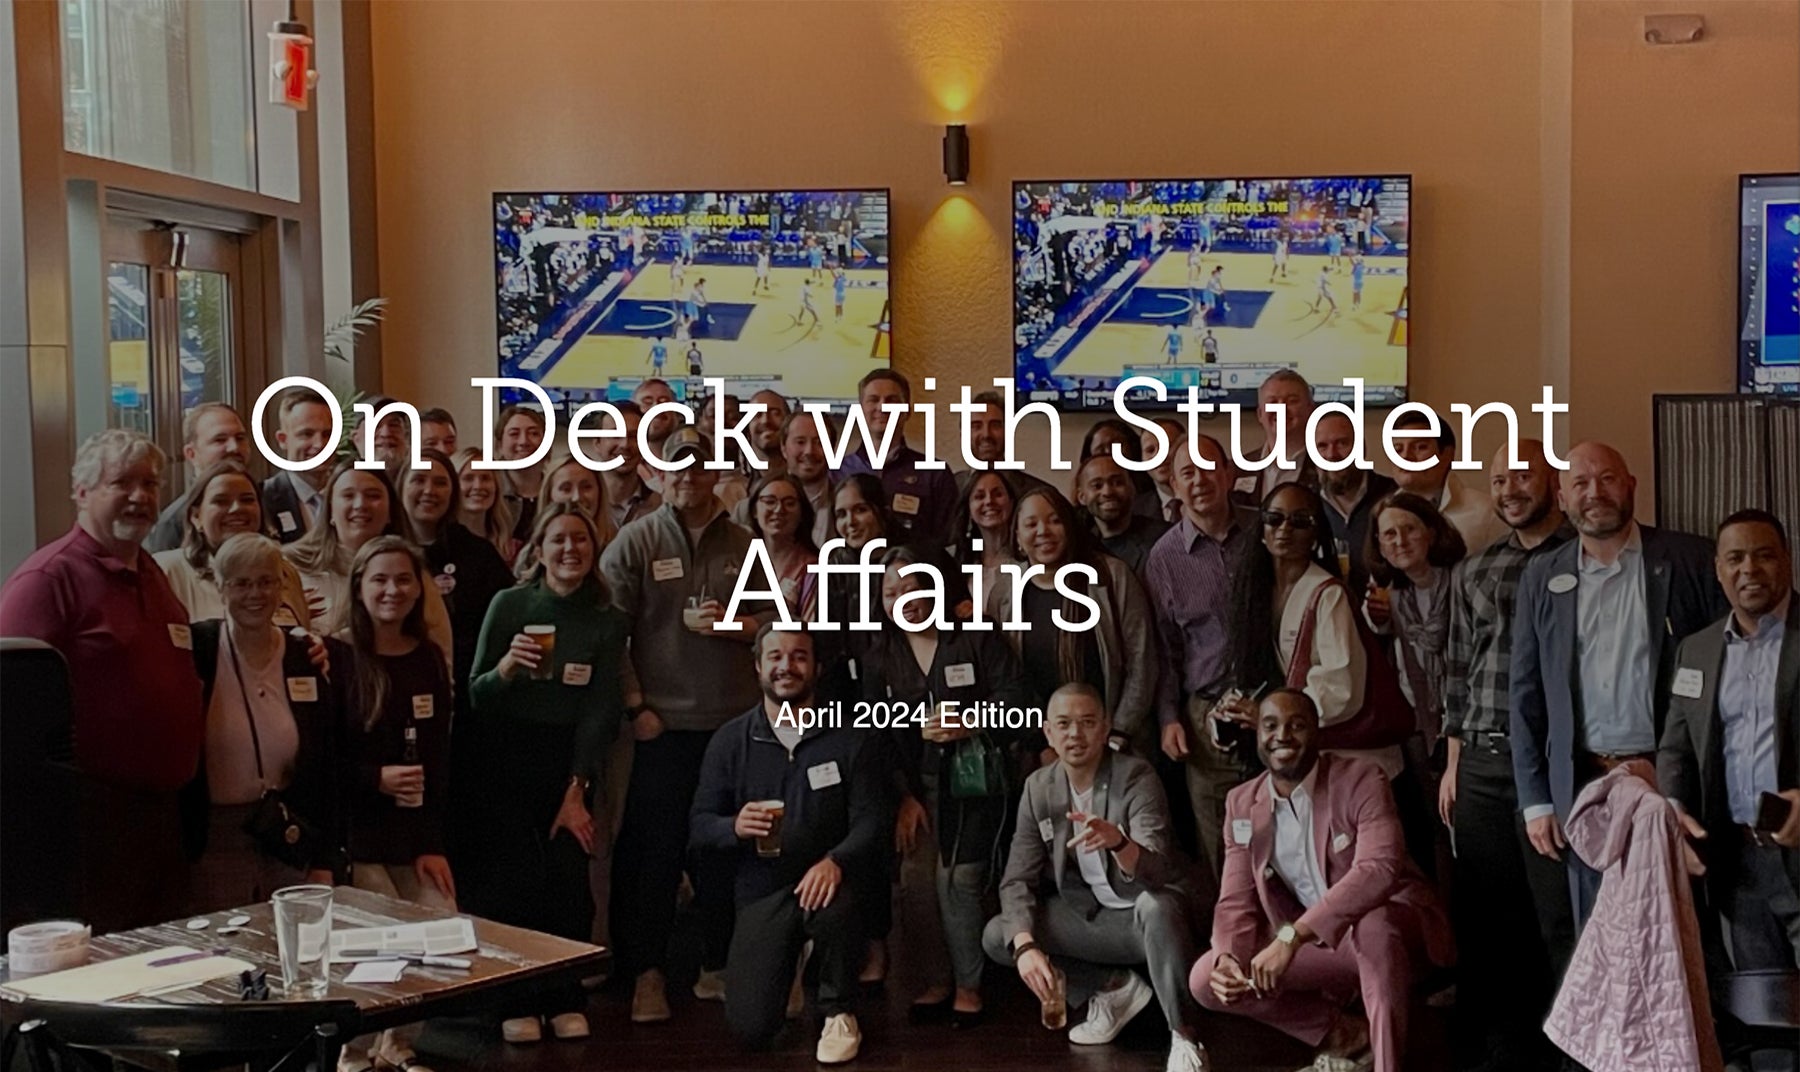 APRIL, On Deck with Student Affairs